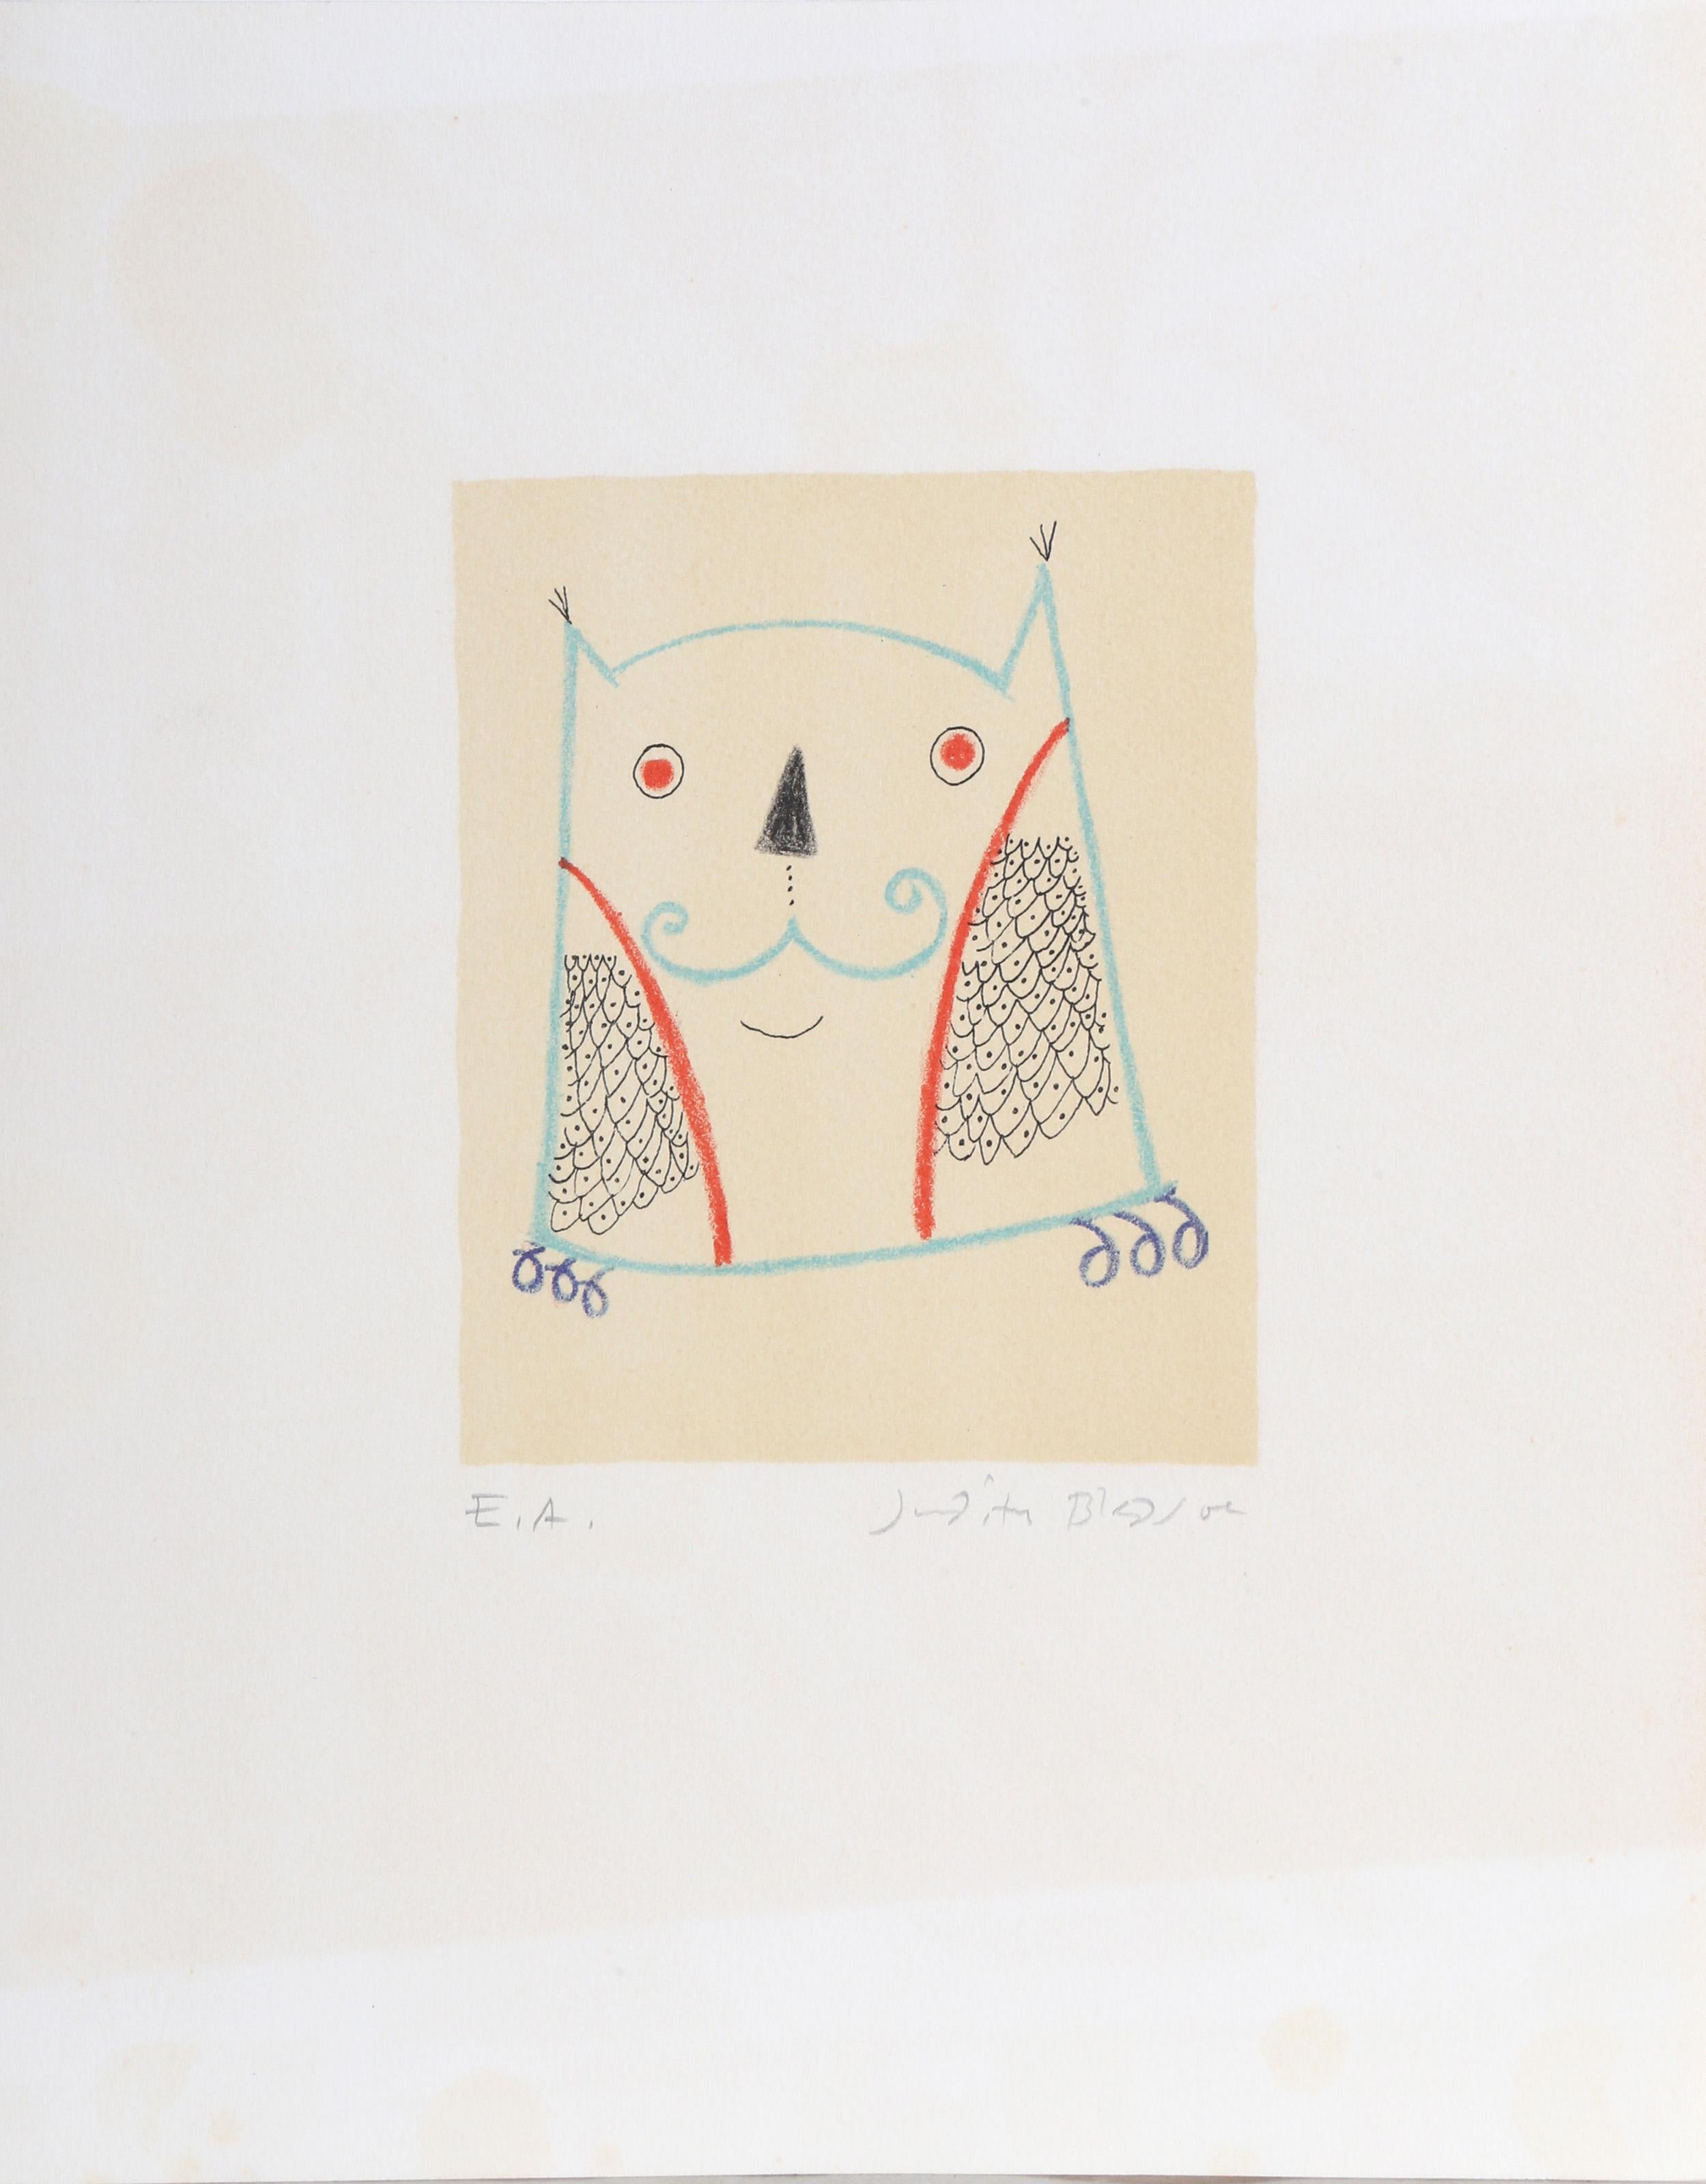 Judith Bledsoe, American (1938 - 2013) -  Blue Cat. Year: circa 1974, Medium: Lithograph, signed in pencil, Edition: EA, Size: 15  x 10.5 in. (38.1  x 26.67 cm), Description: Rendered in a minimalist fashion, this image of a cat may not be very